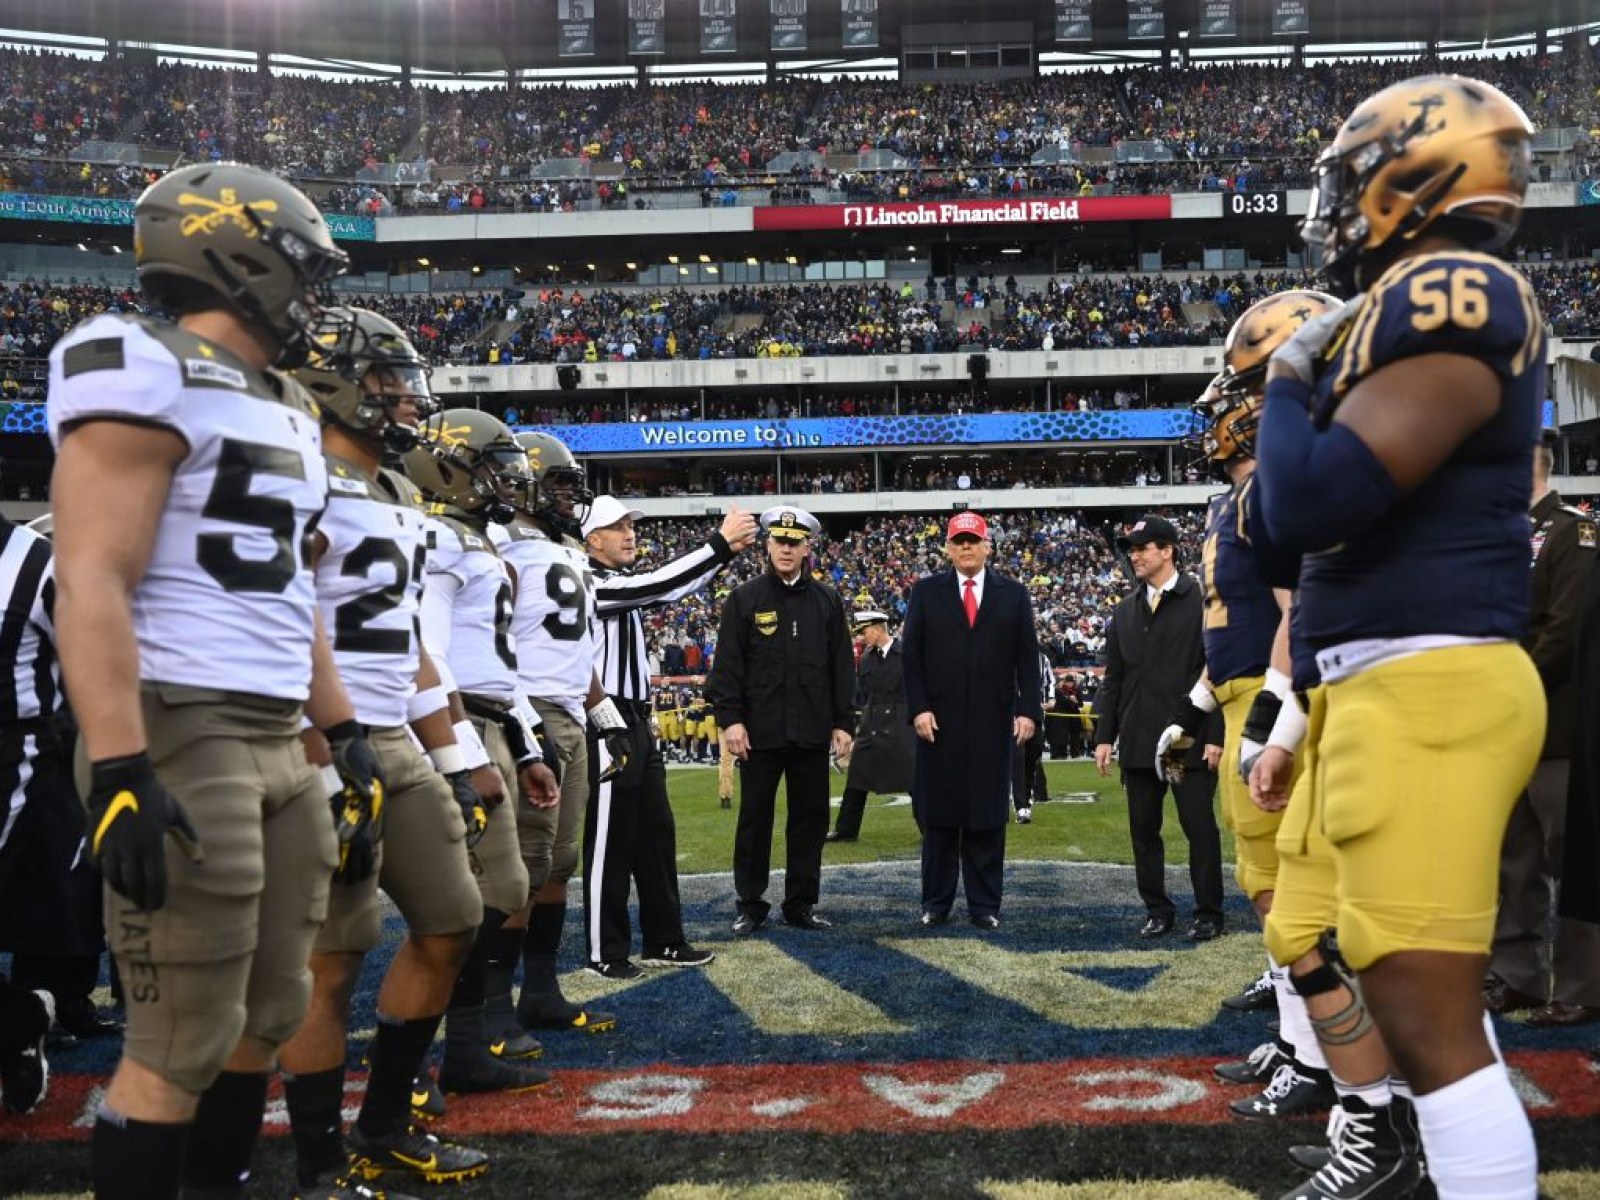 Veteran Says Students Who Flashed 'OK' Symbol At Army Navy Football Game 'Disgraced The Armed Forces'